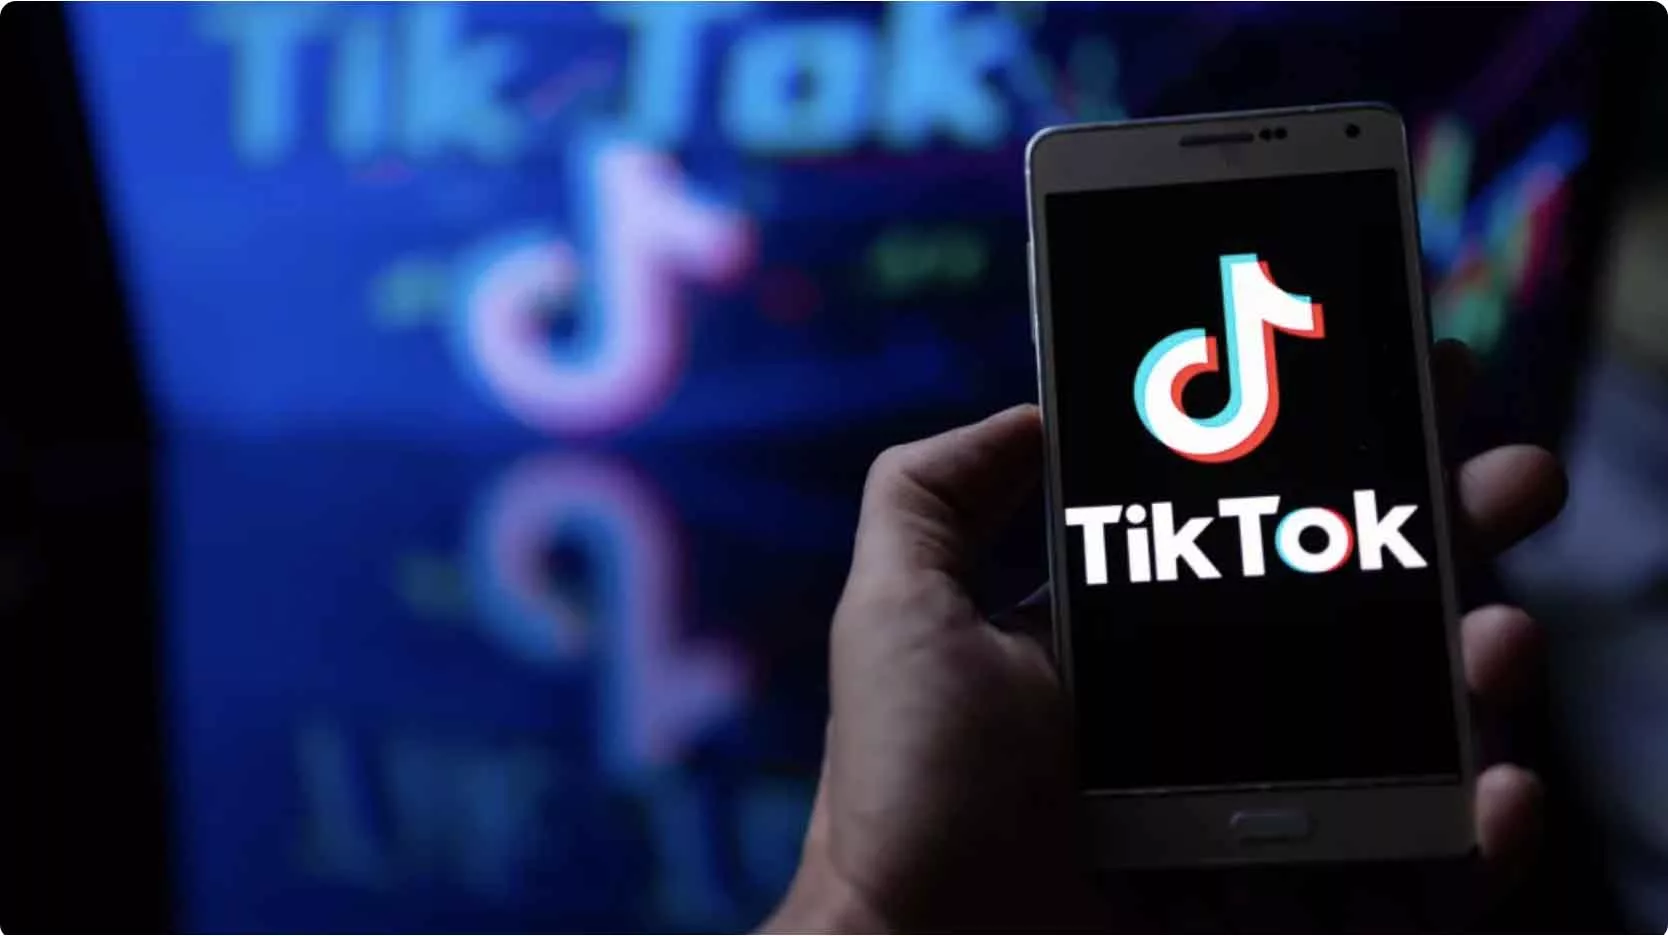 With Profile Kit, users will be able to add TikTok videos to other sites